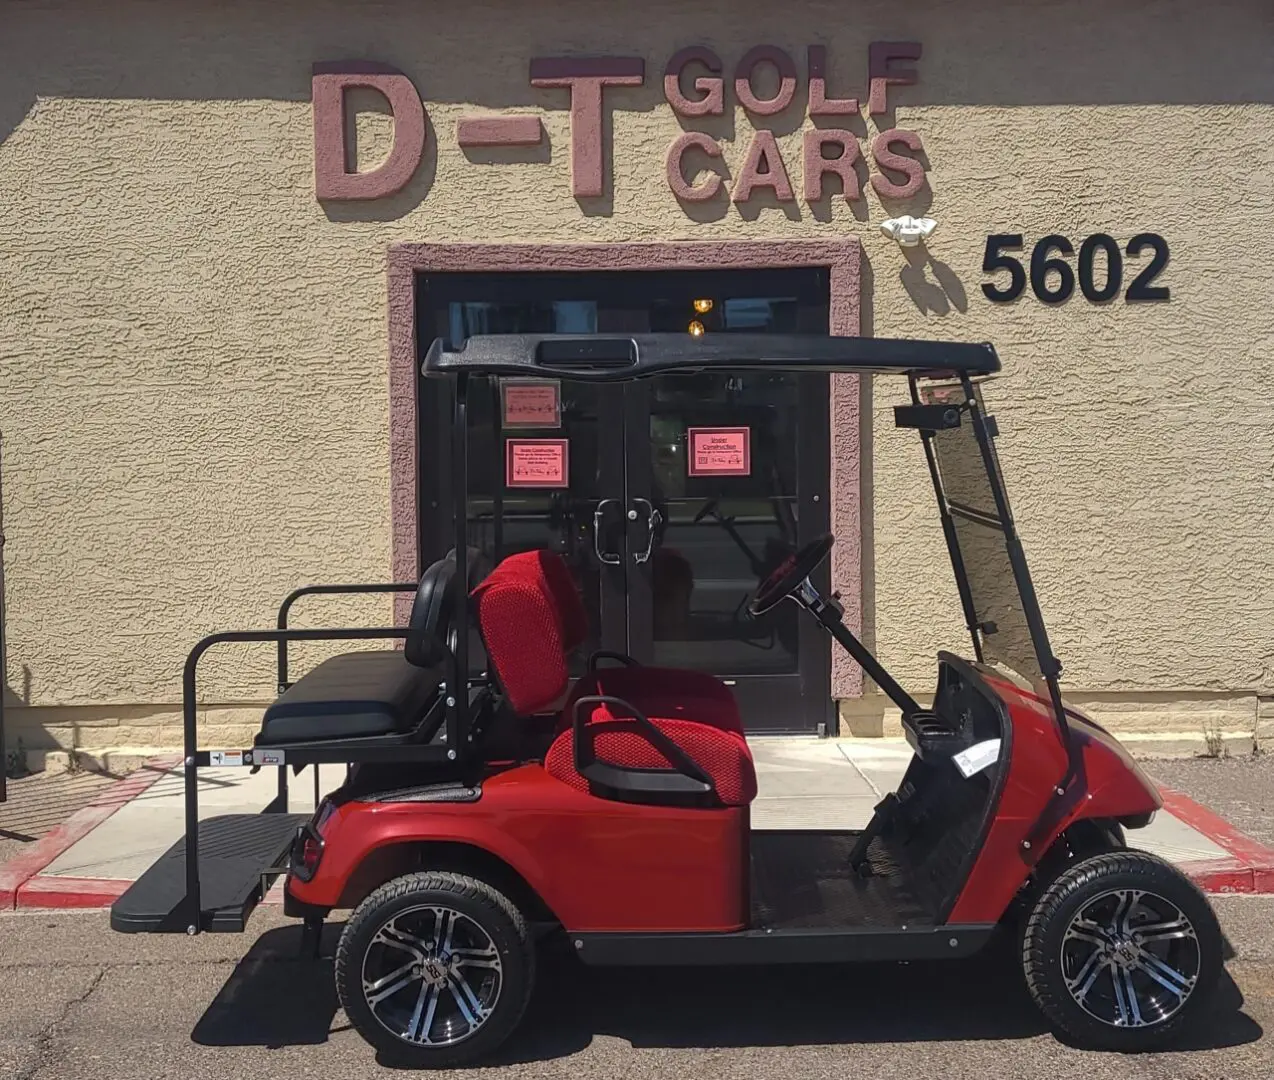 A red golf cart parked in front of a building.